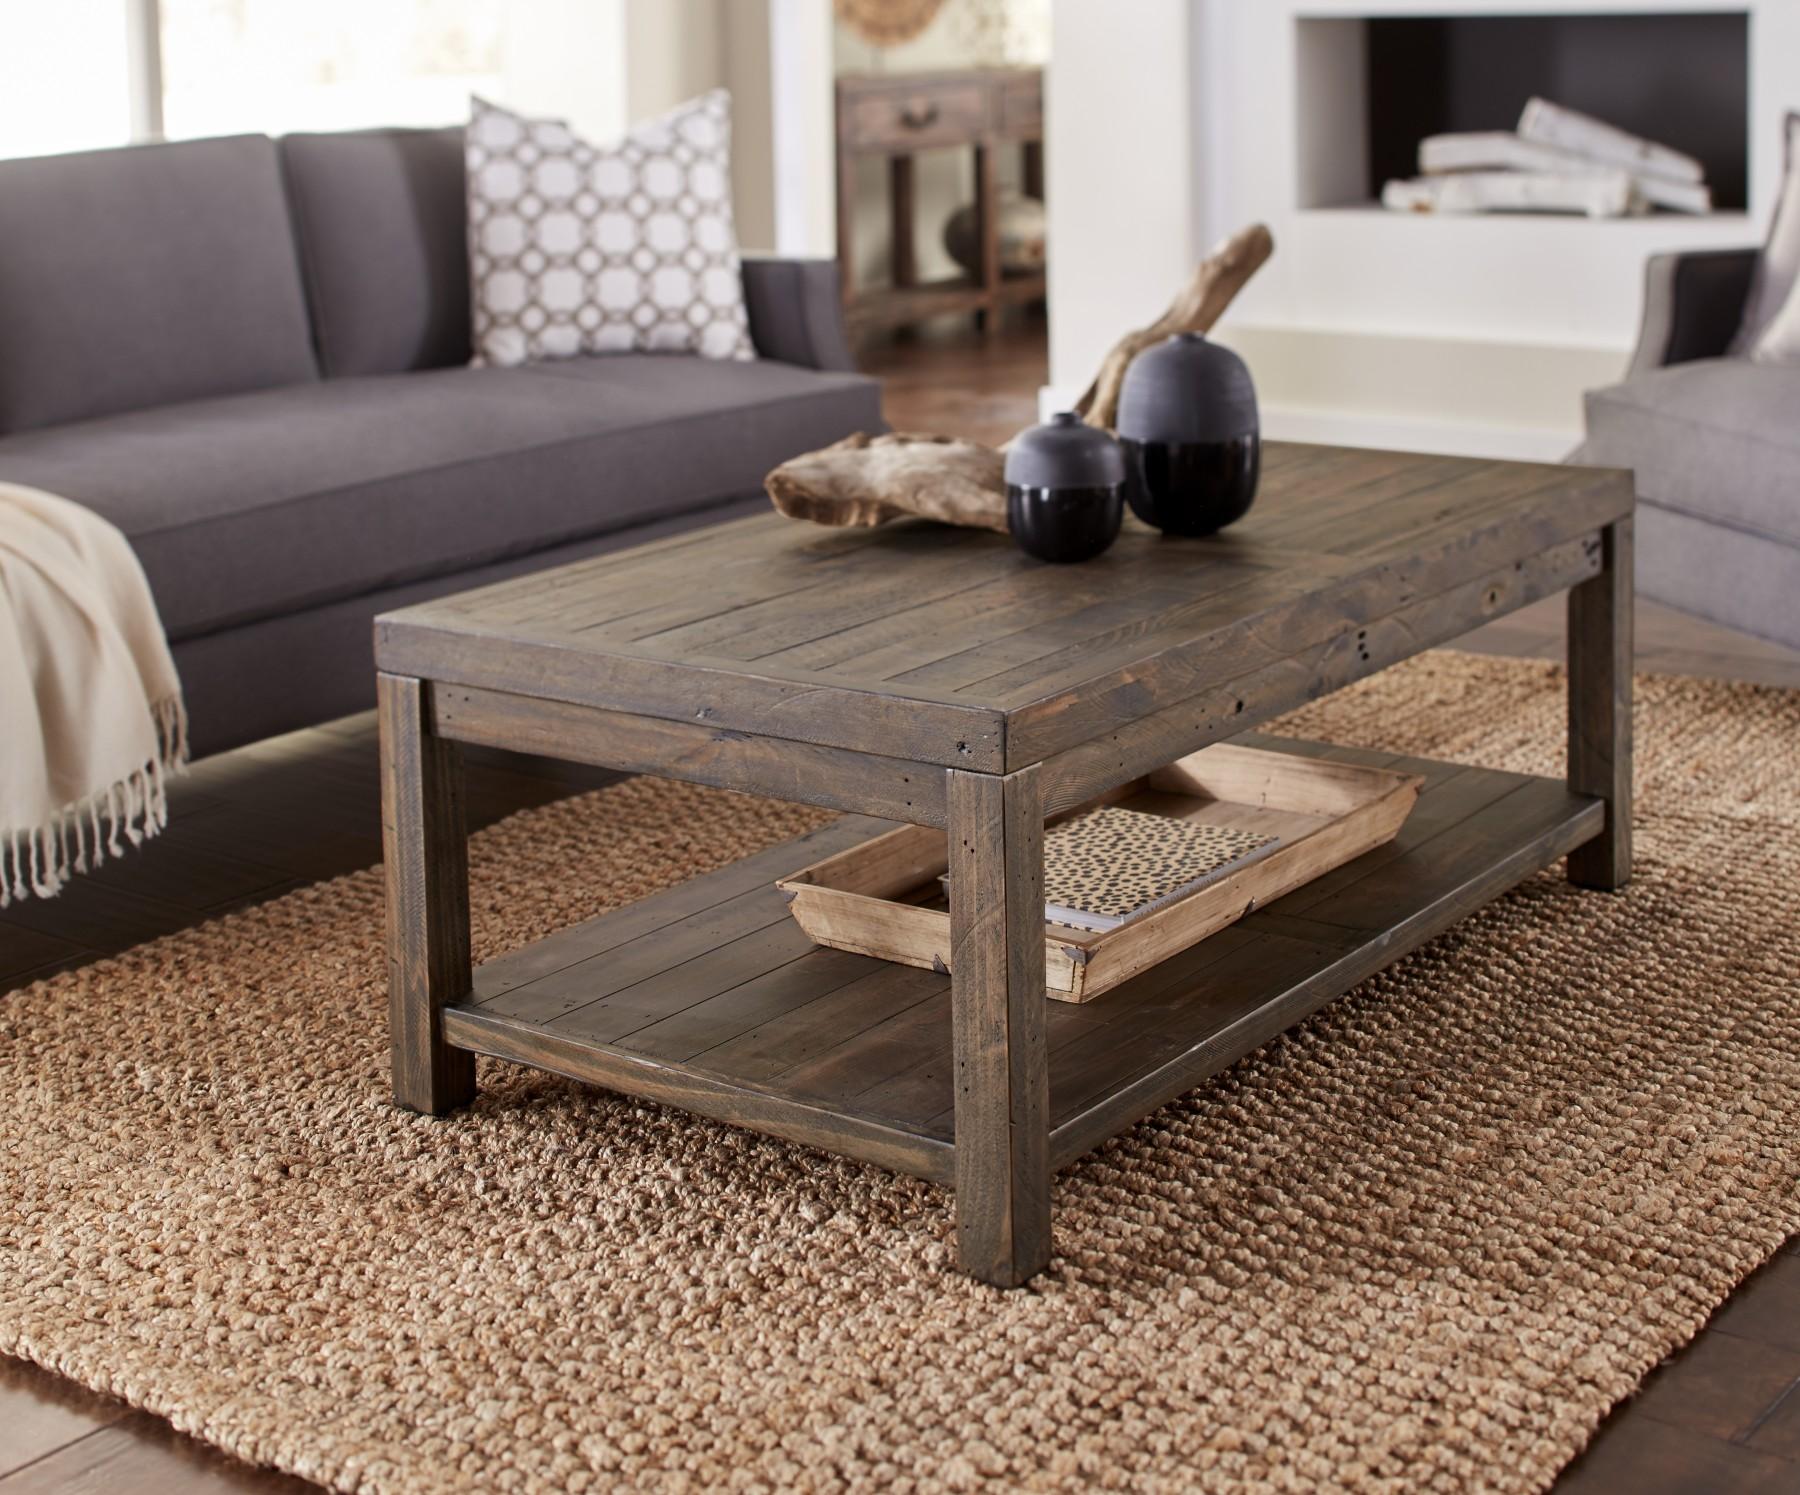 

    
Reclaimed Wood Rectangular Coffee Table in Smoky Taupe CRASTER by Modus Furniture
